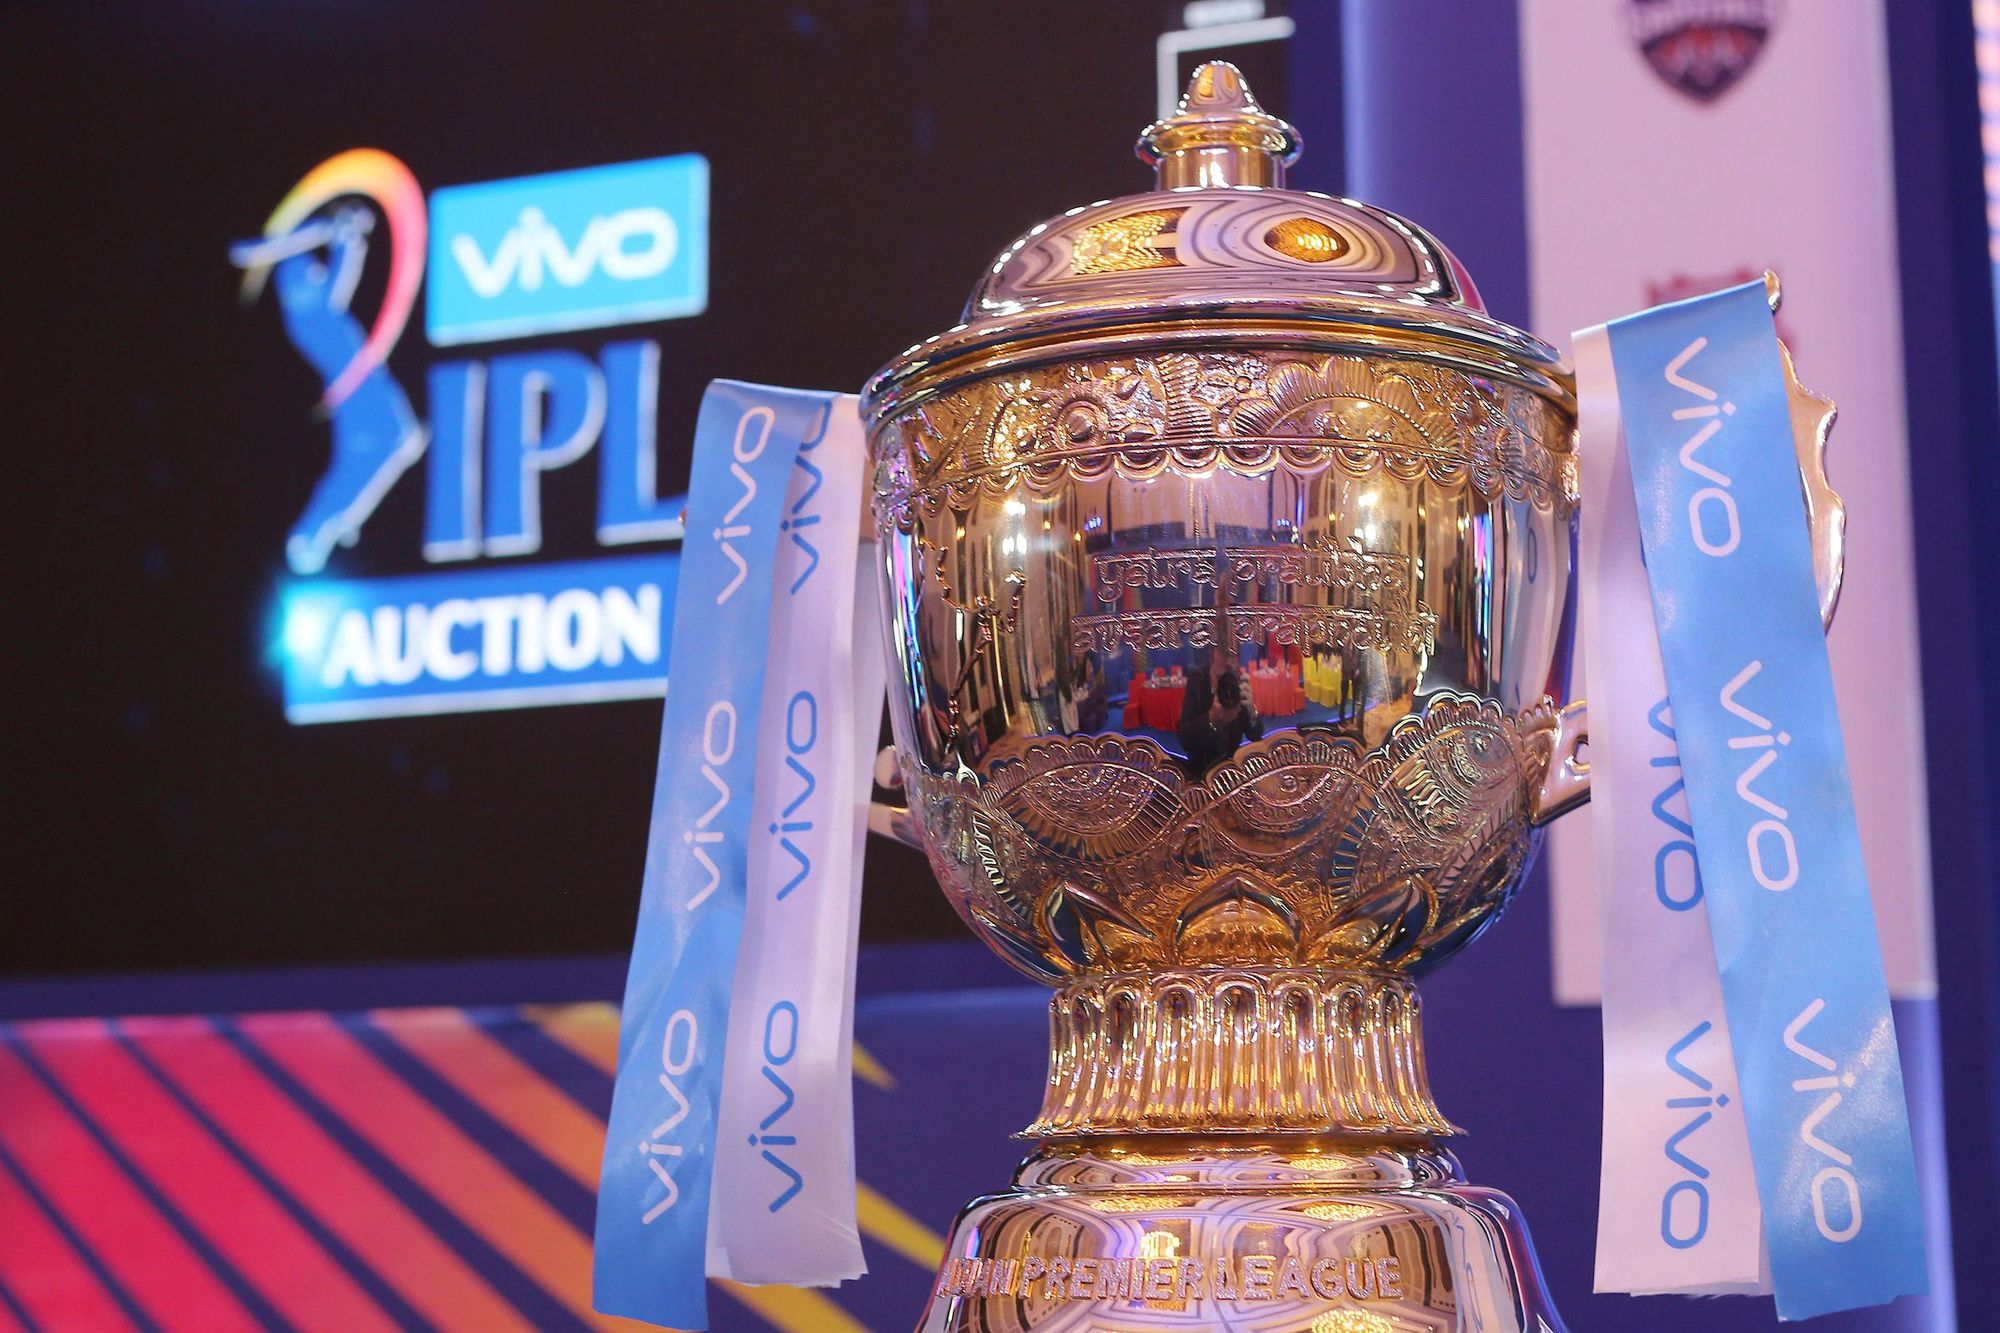 IPL 2021 auction will take place on Feb 18 in Chennai